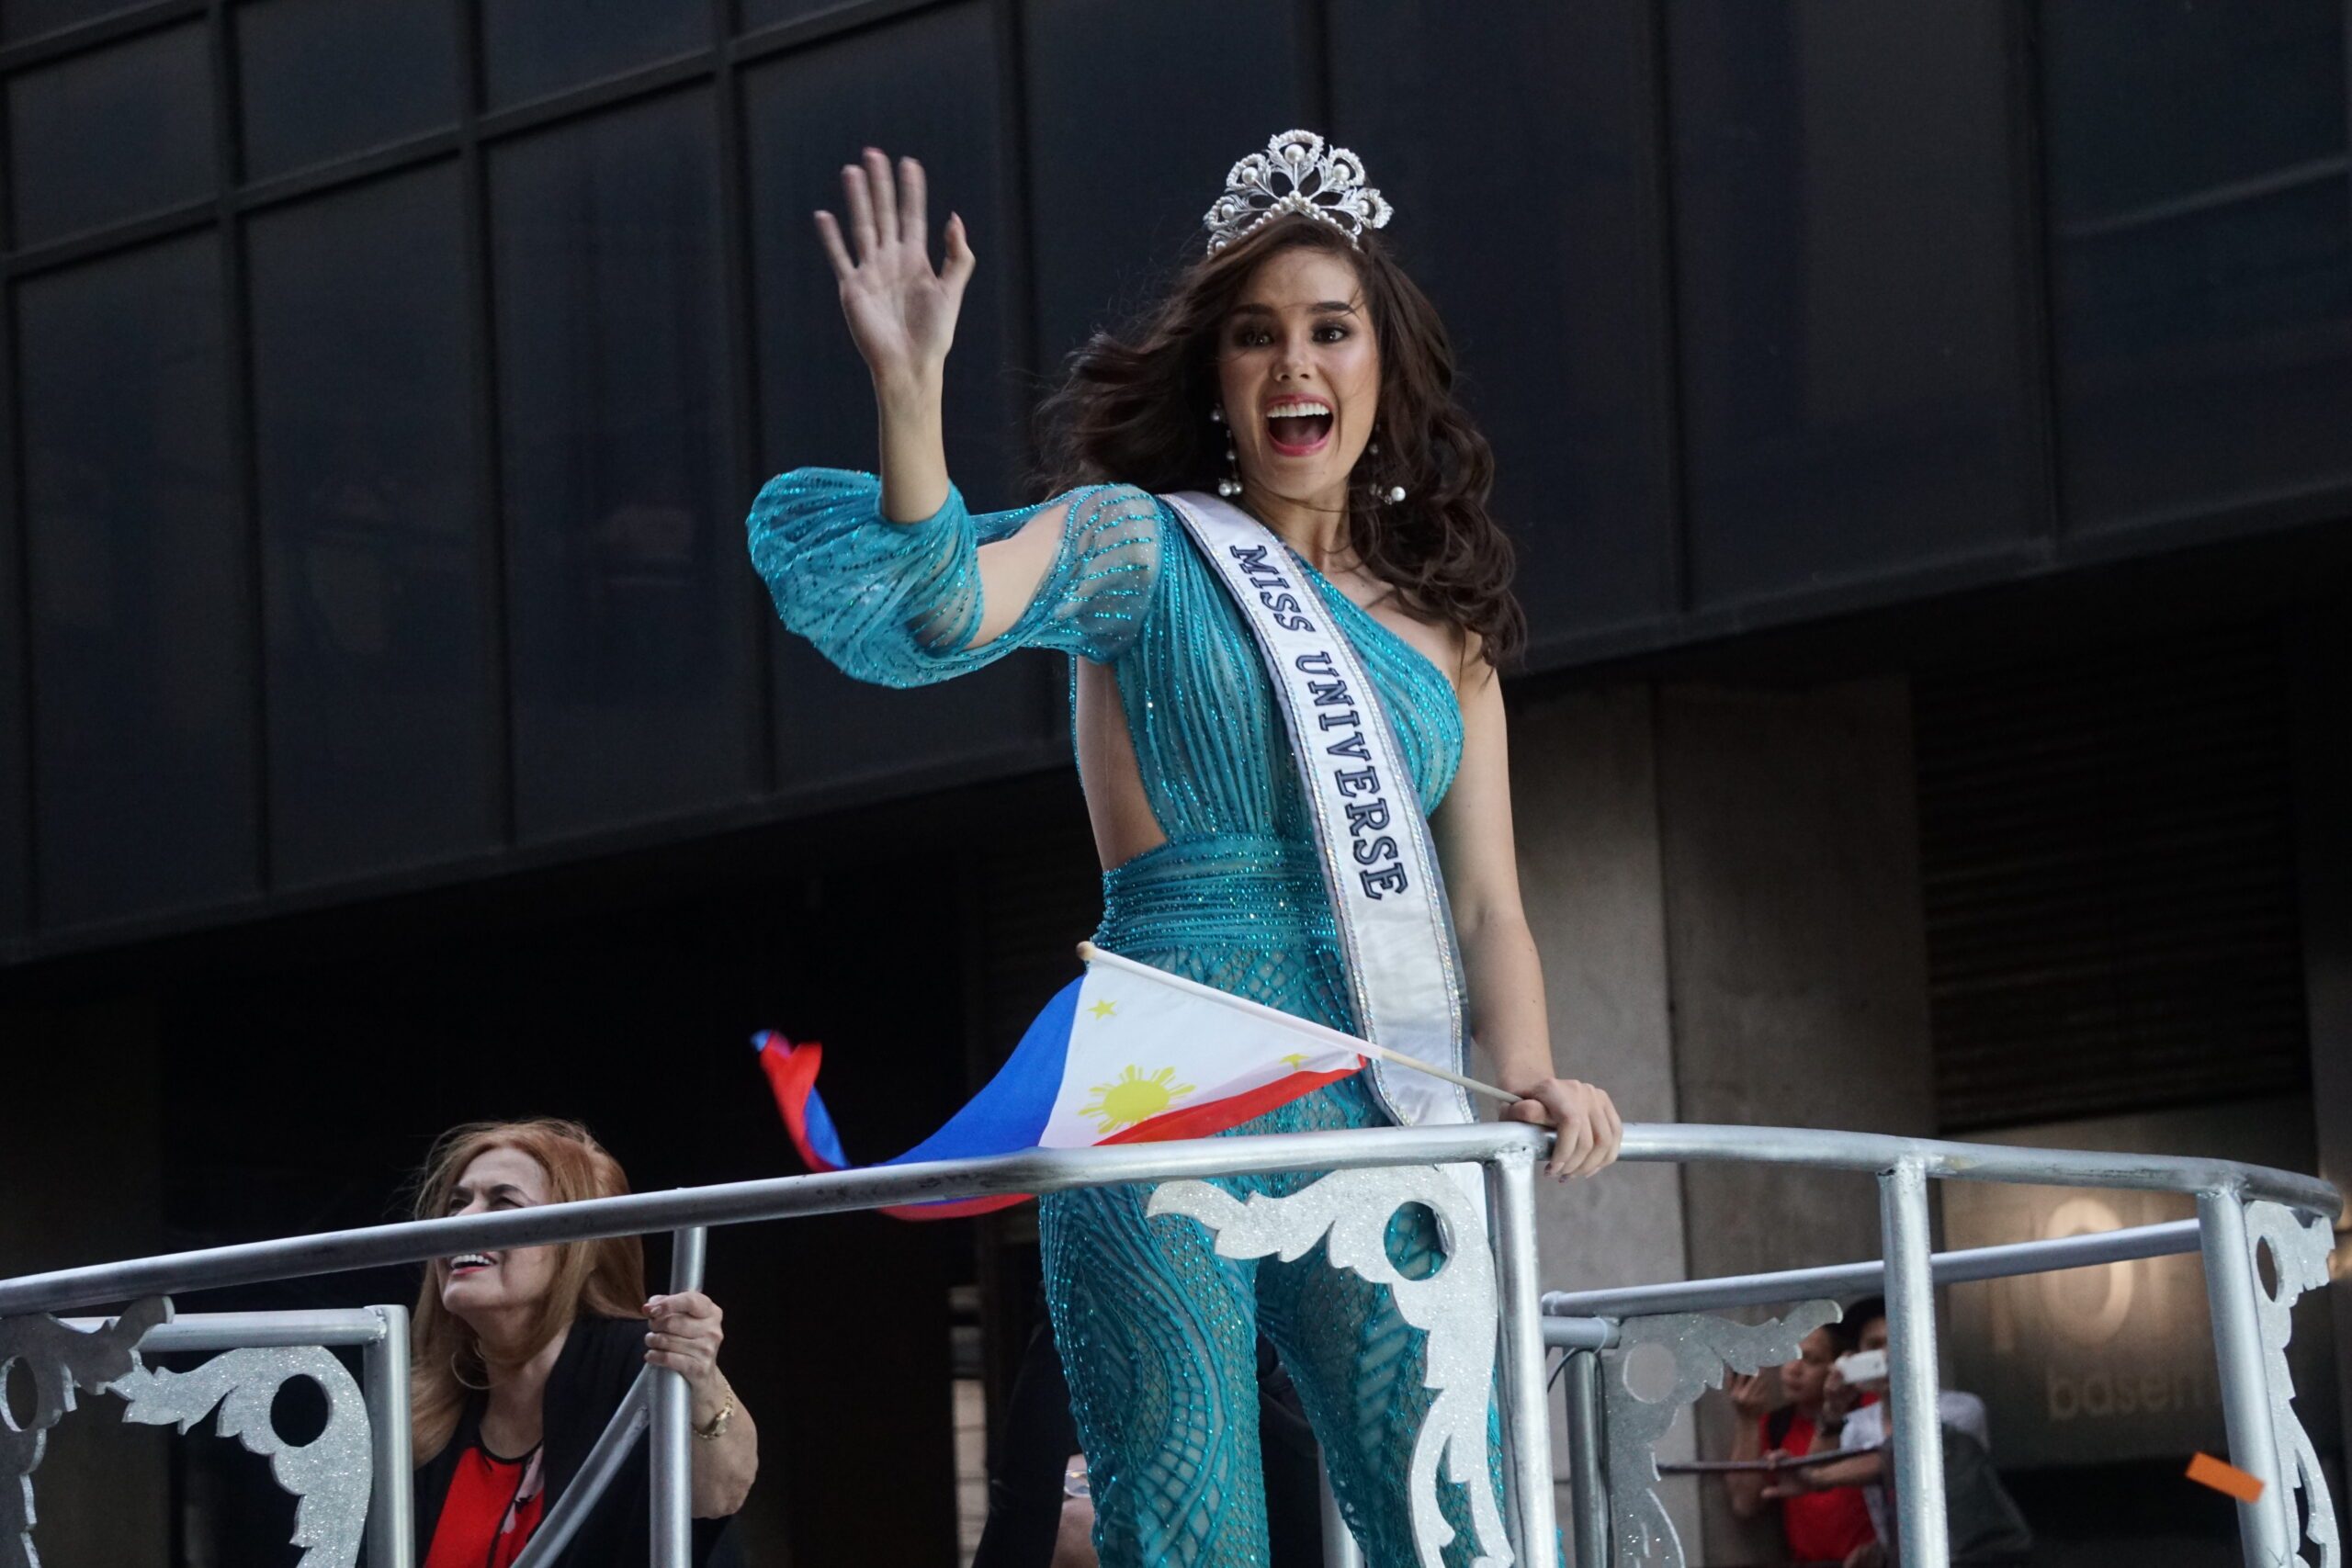 IN PHOTOS: Catriona Gray’s whirlwind homecoming week